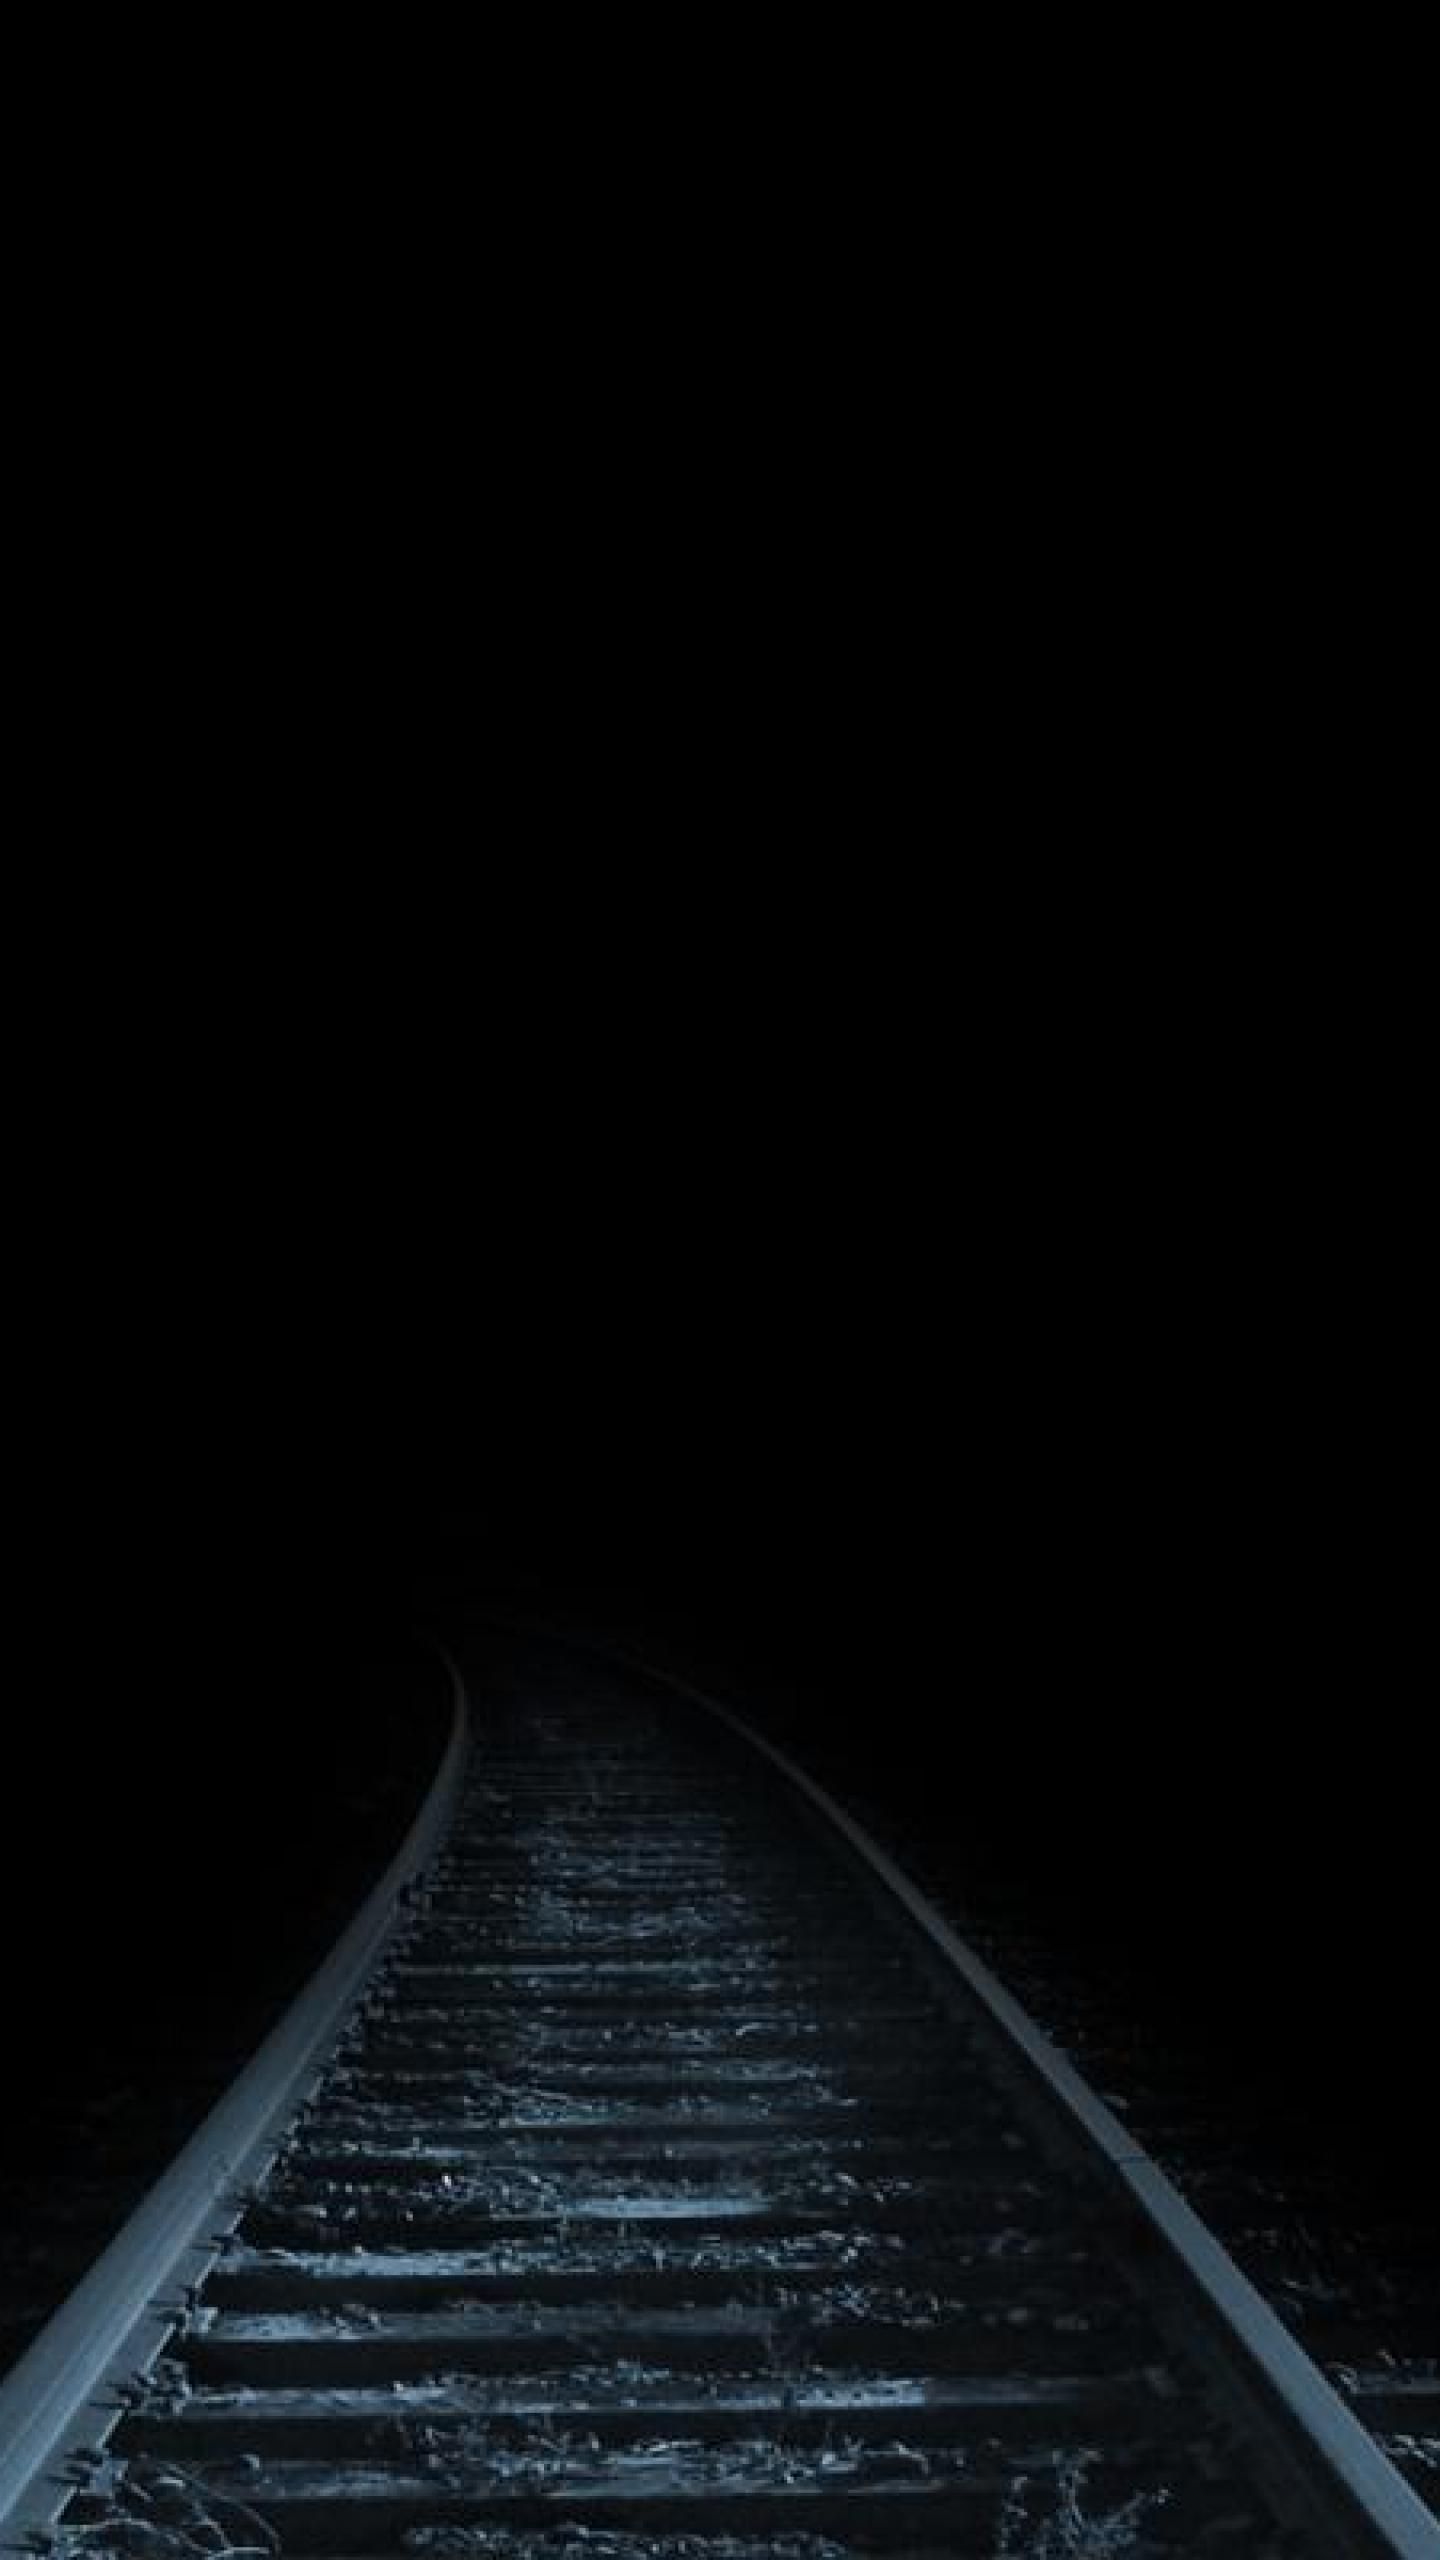 IPhone Wallpaper. Black, Darkness, White, Black And White, Sky